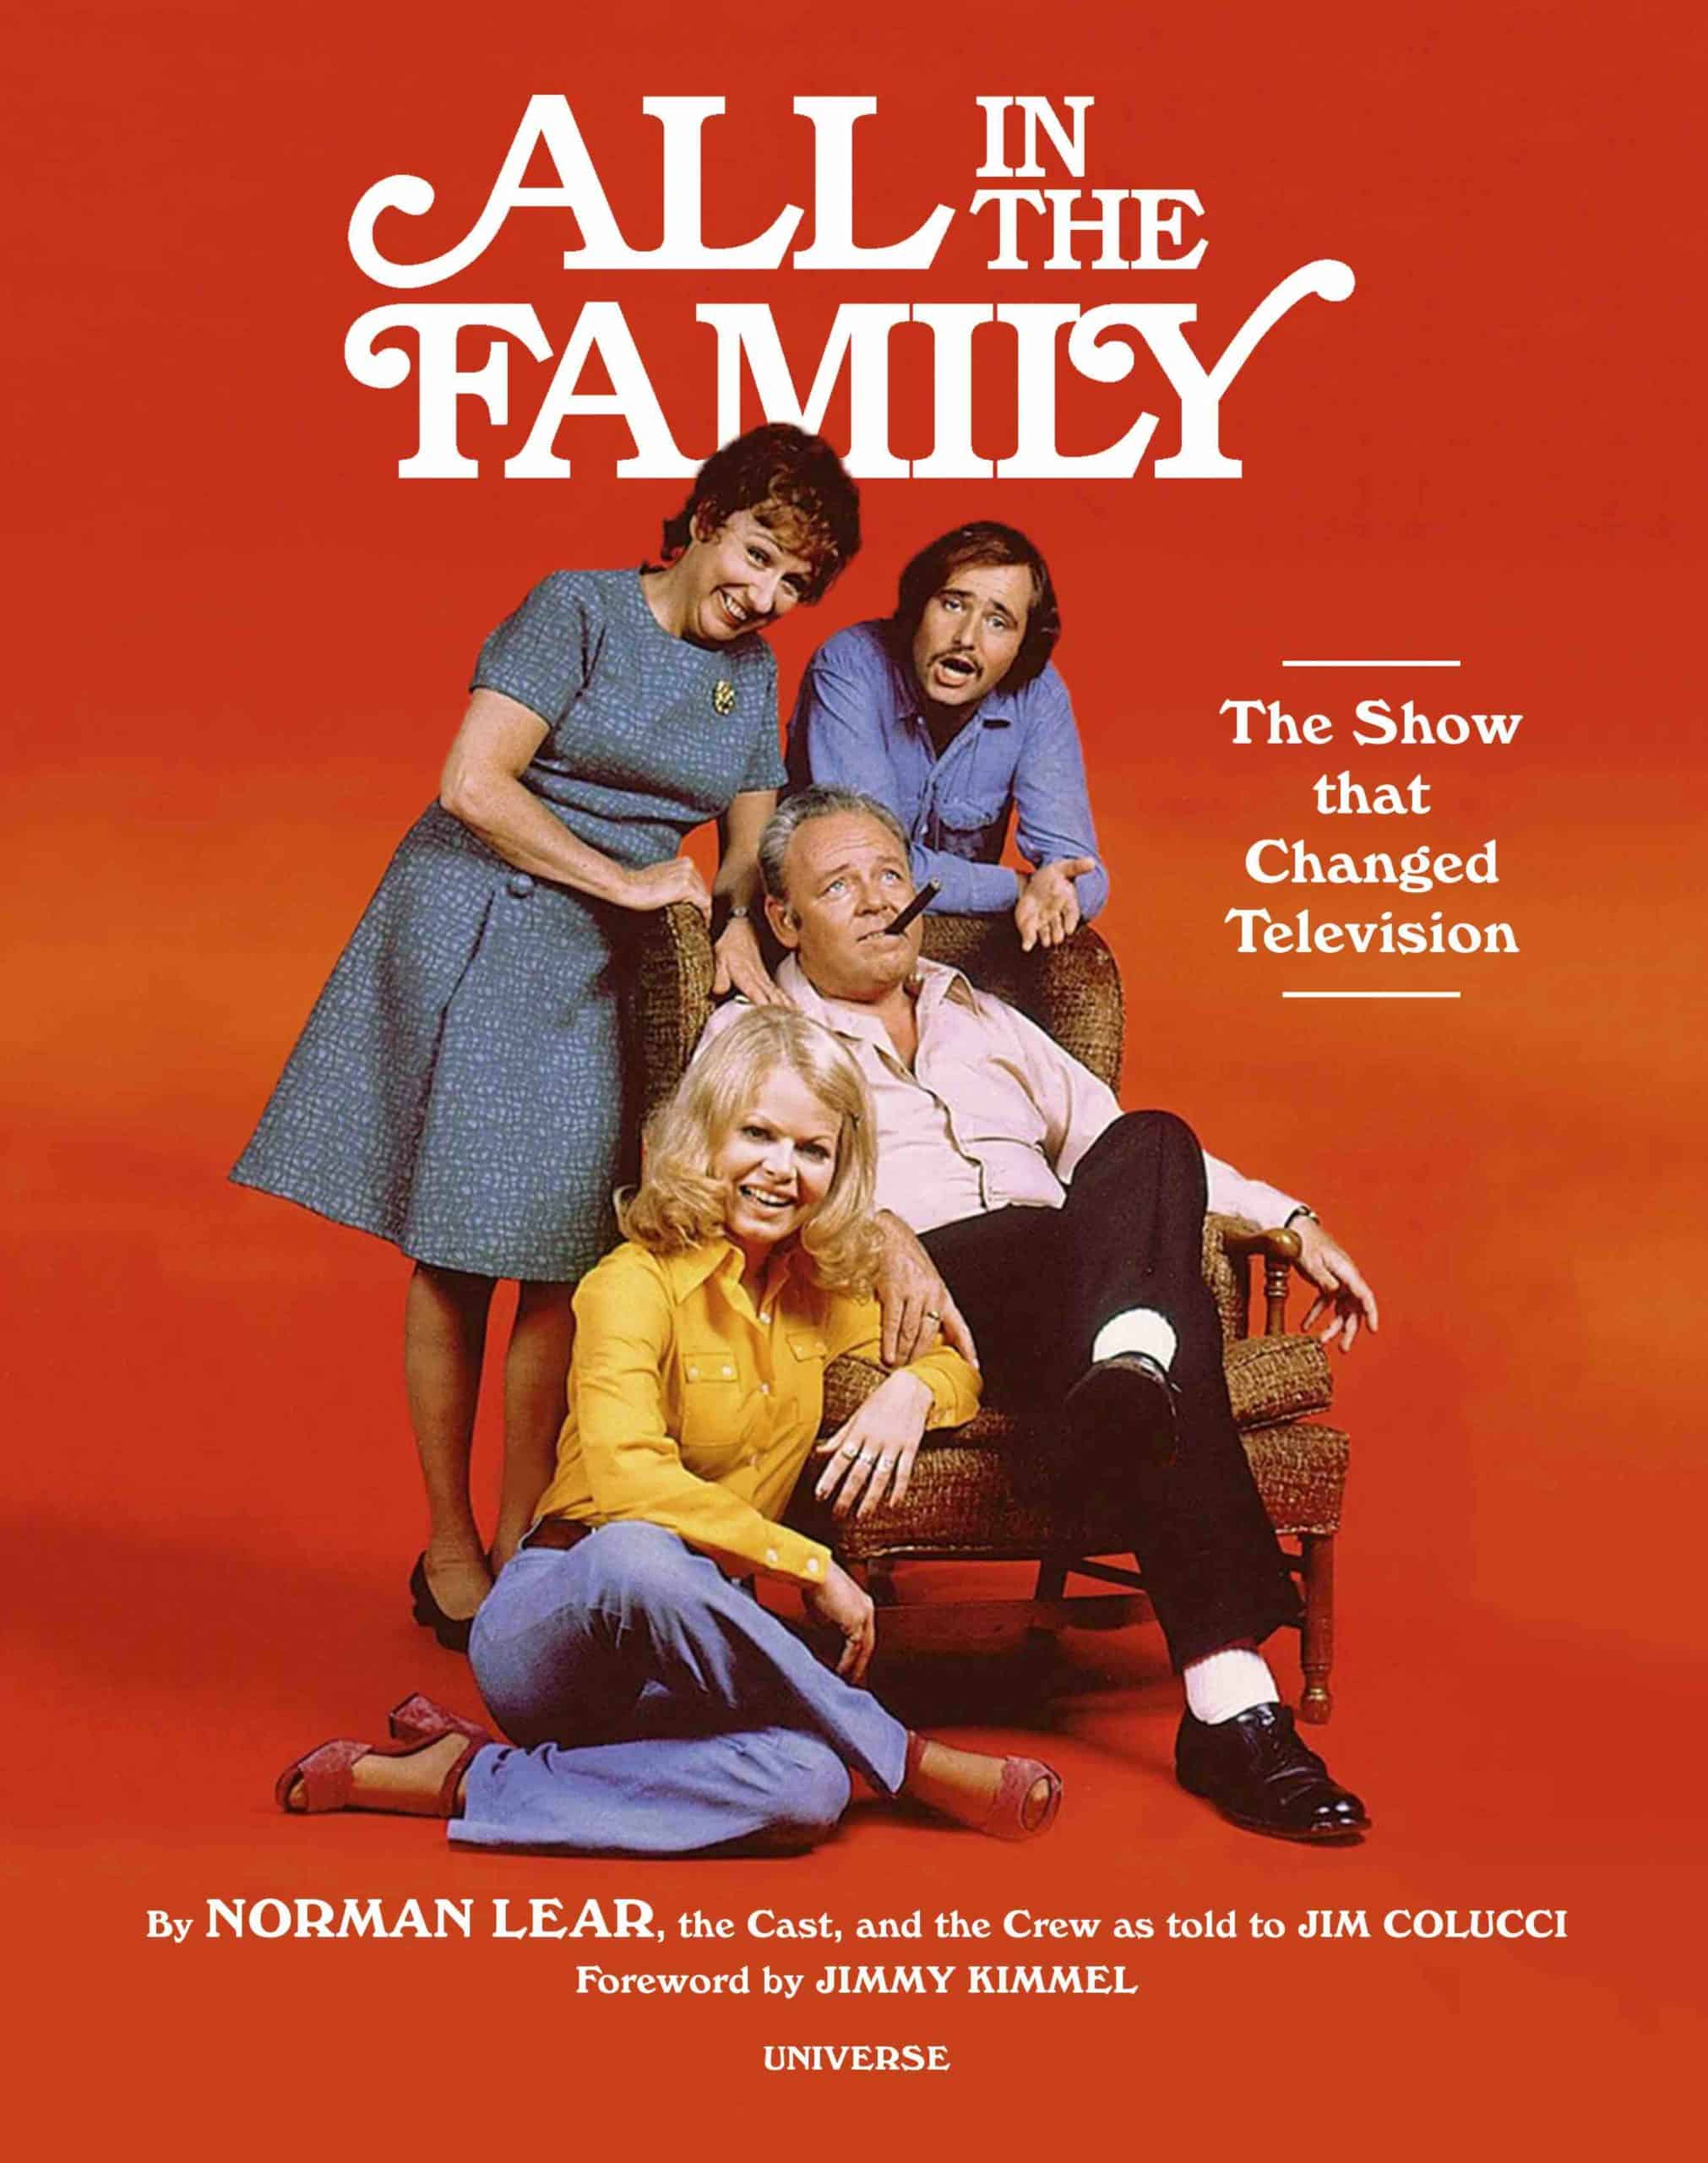 AITF_FC_4P_042721 All in the Family cover (1)